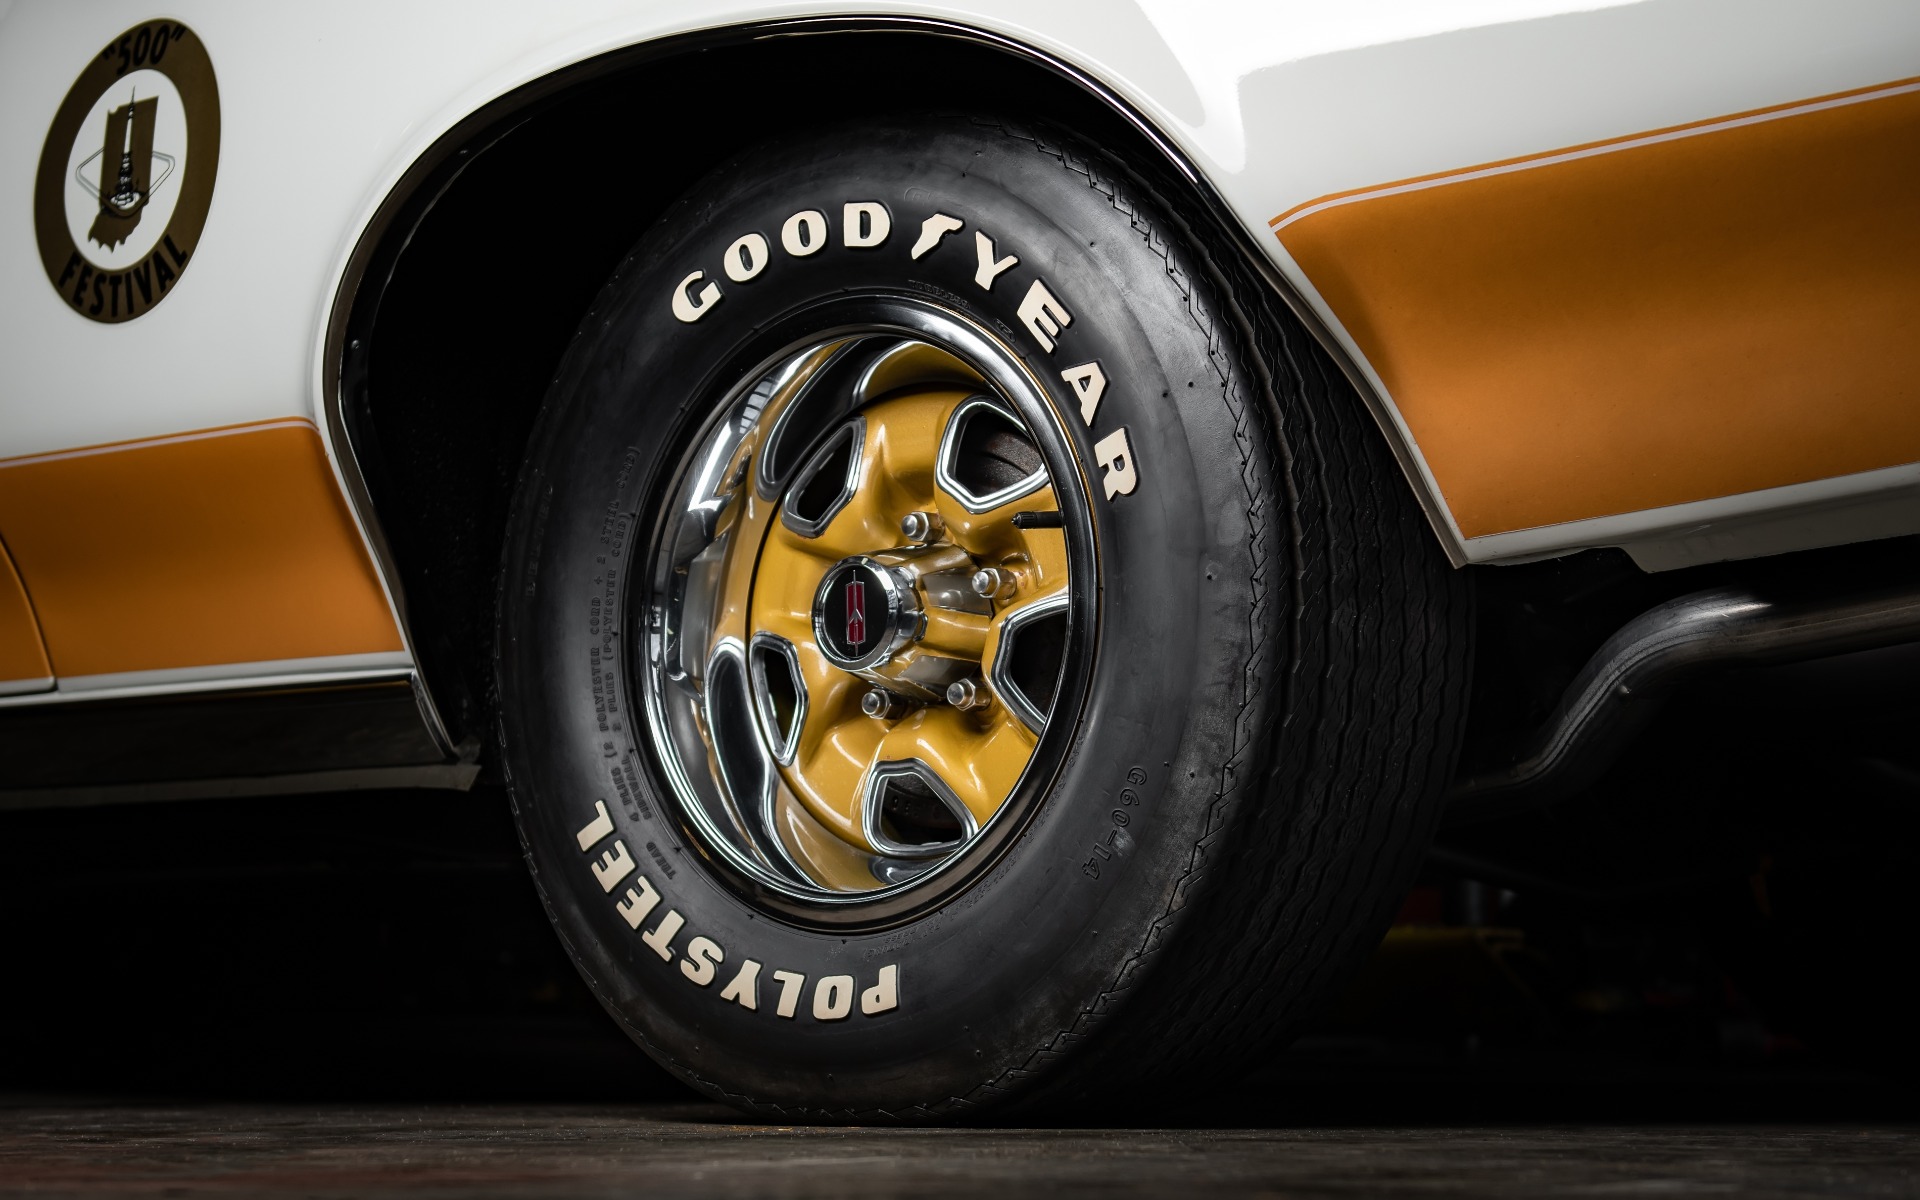 Used-1972-Oldsmobile-HurstOlds-Convertible-Car--11-of-54-Indy-500-Festival-Pace-Cars-MCACN-Gold-Winner